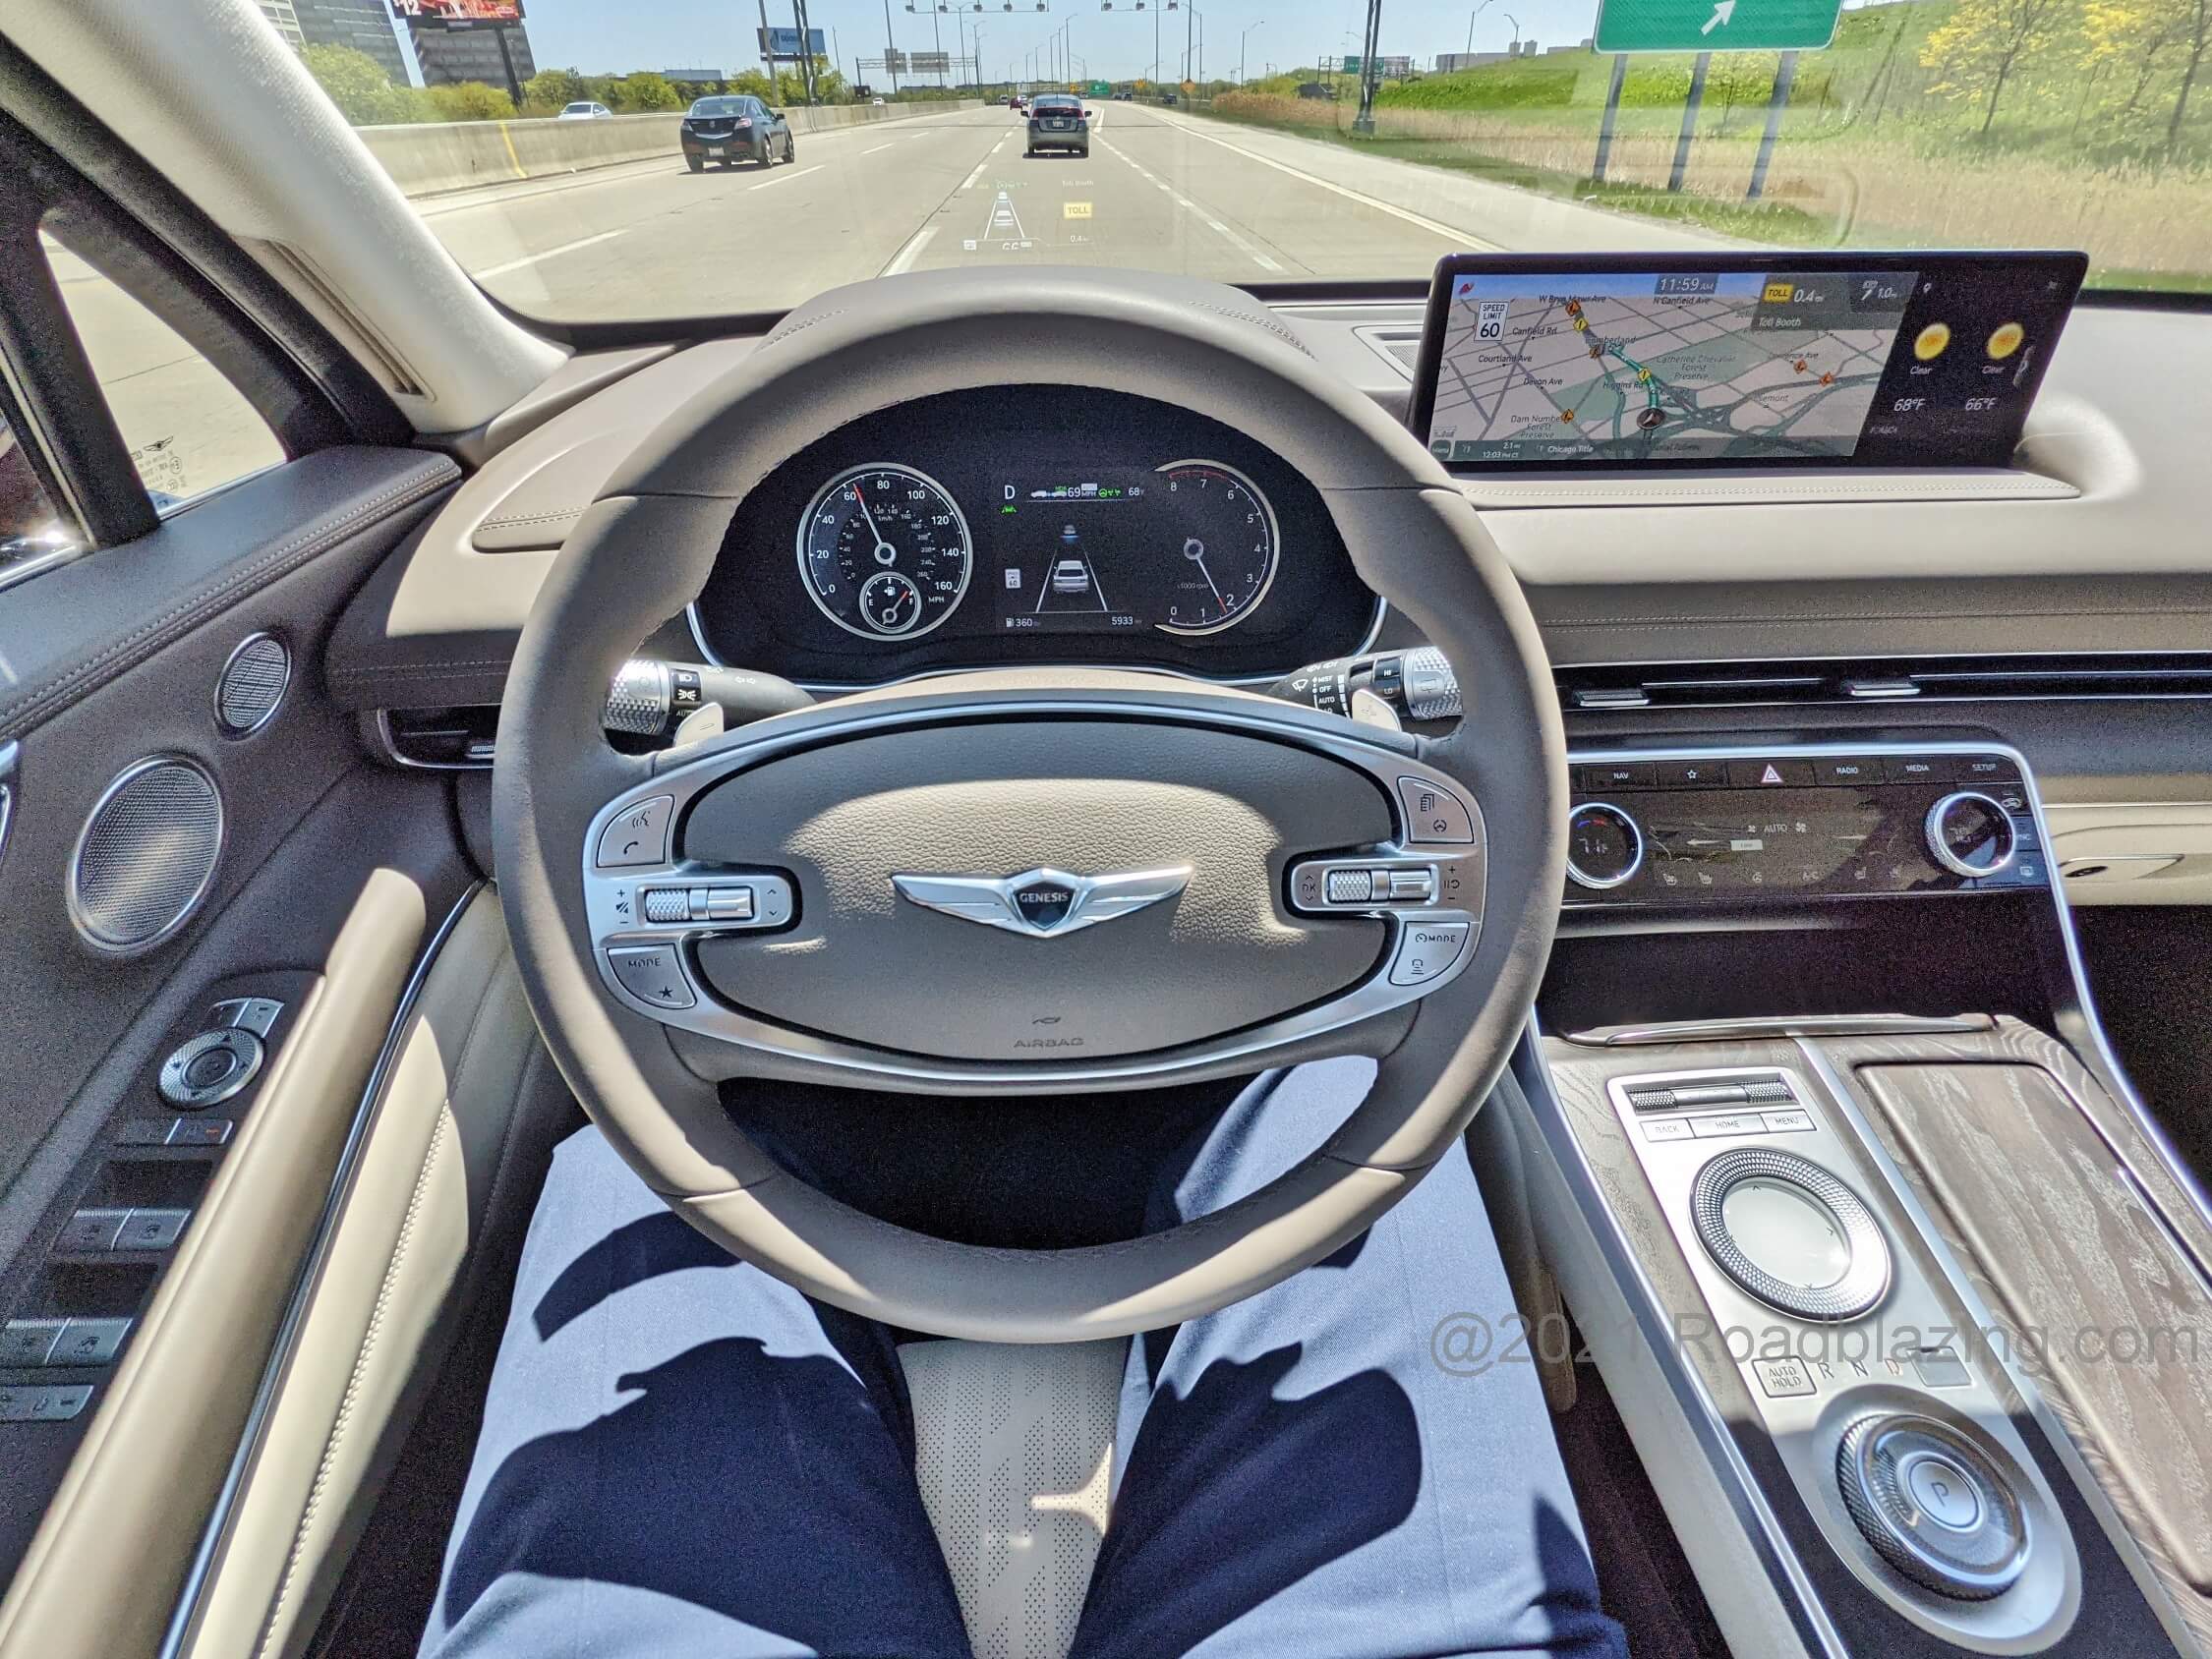 2021 Genesis GV80 2.5T AWD: Effortless interstate cruising made possible by Level 2.0 automated hand-on wheel driver's assist and a large media display and available HUD.